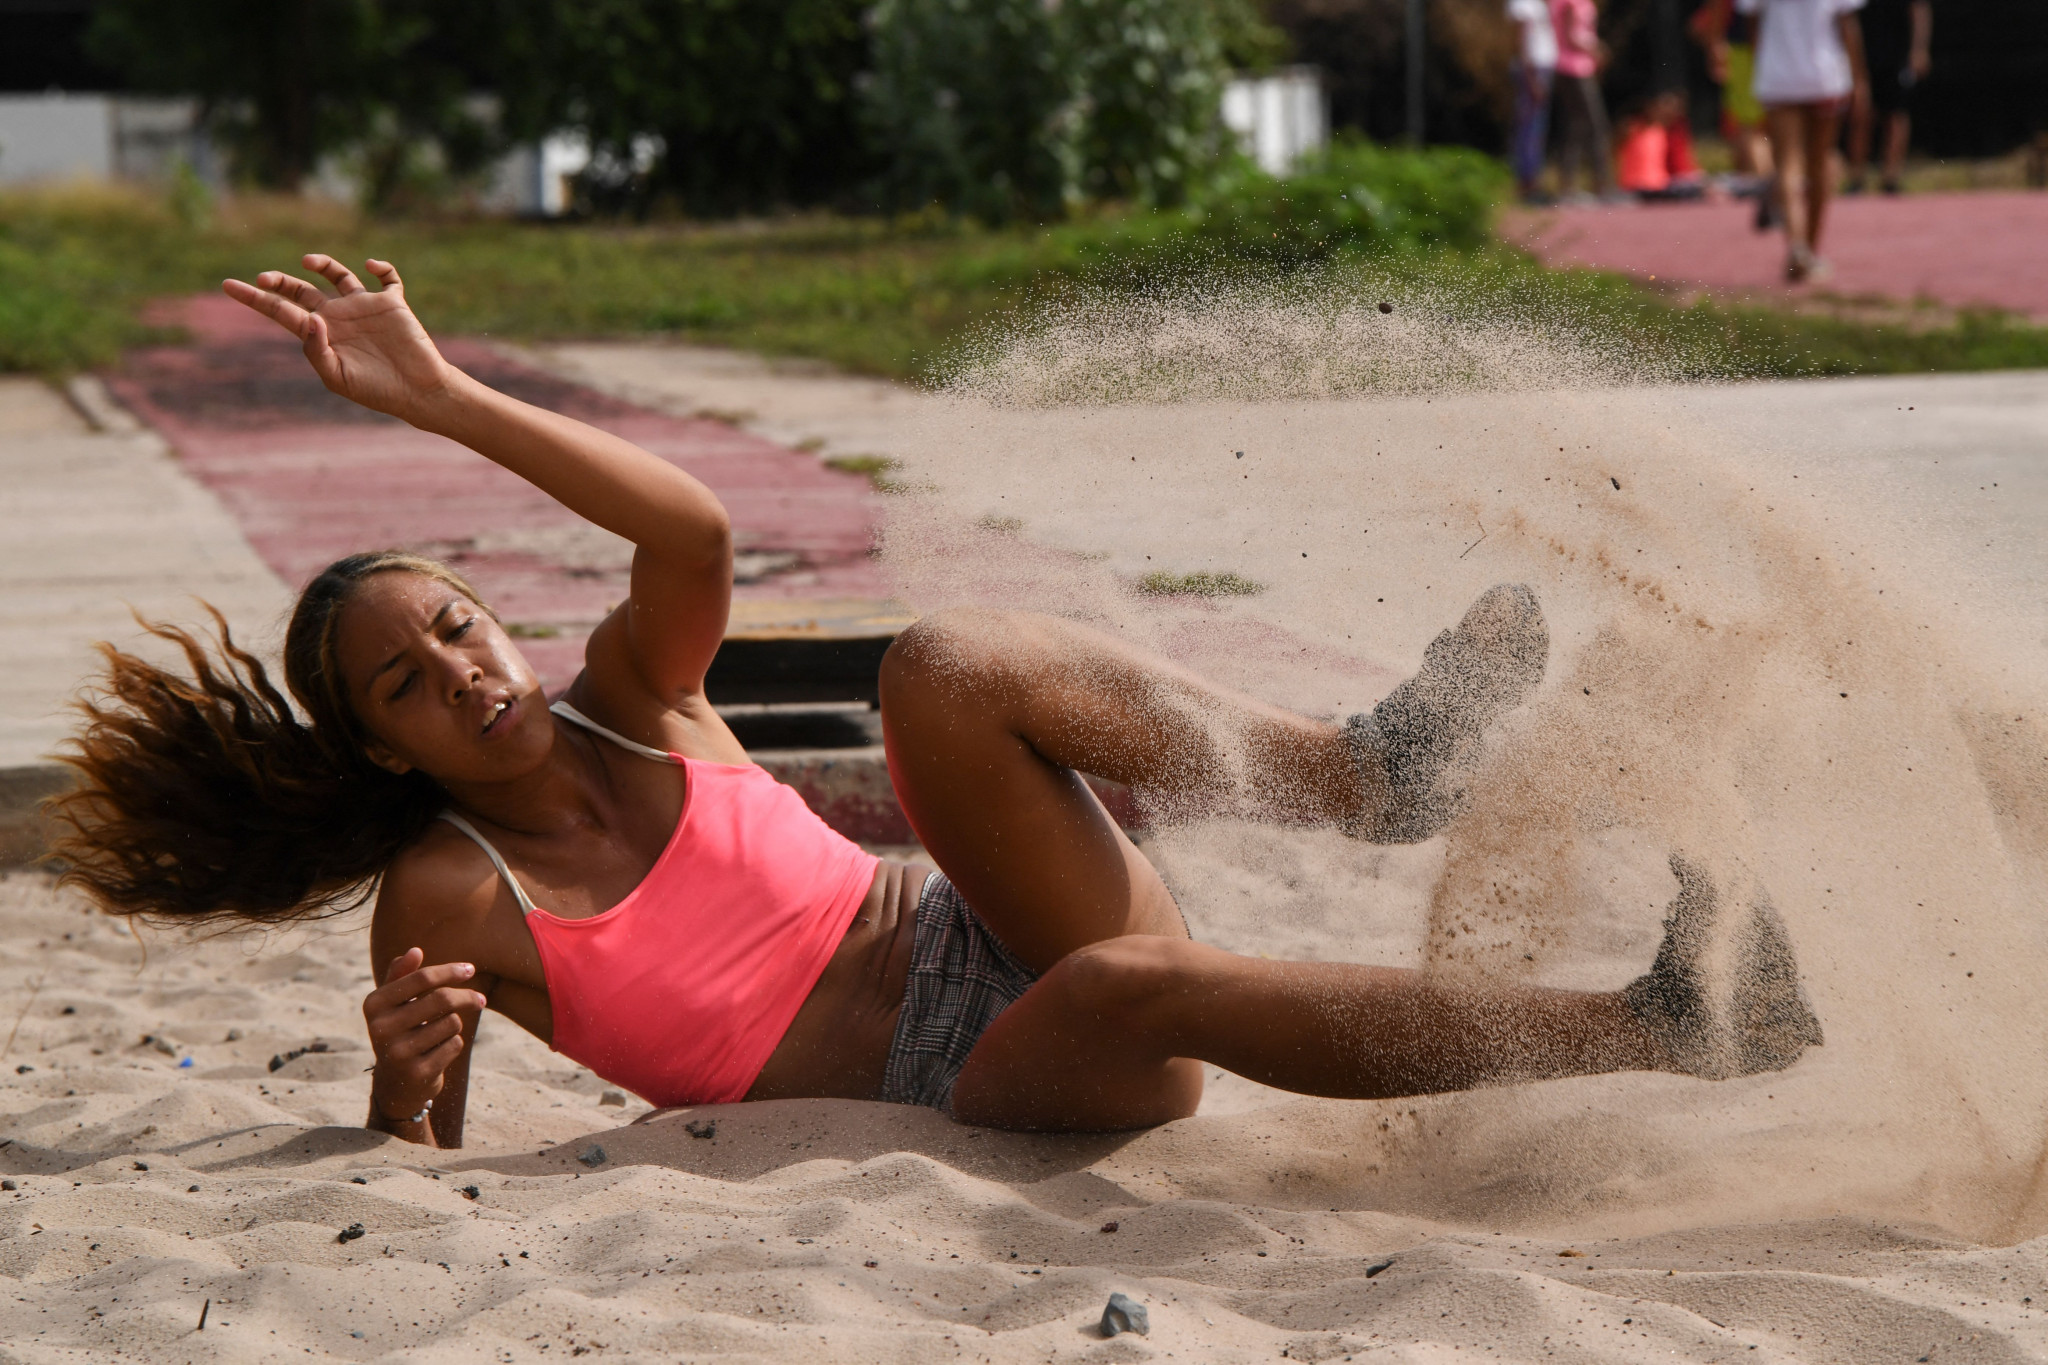 Shoe issue forces Rojas out of long jump at World Athletics Championships